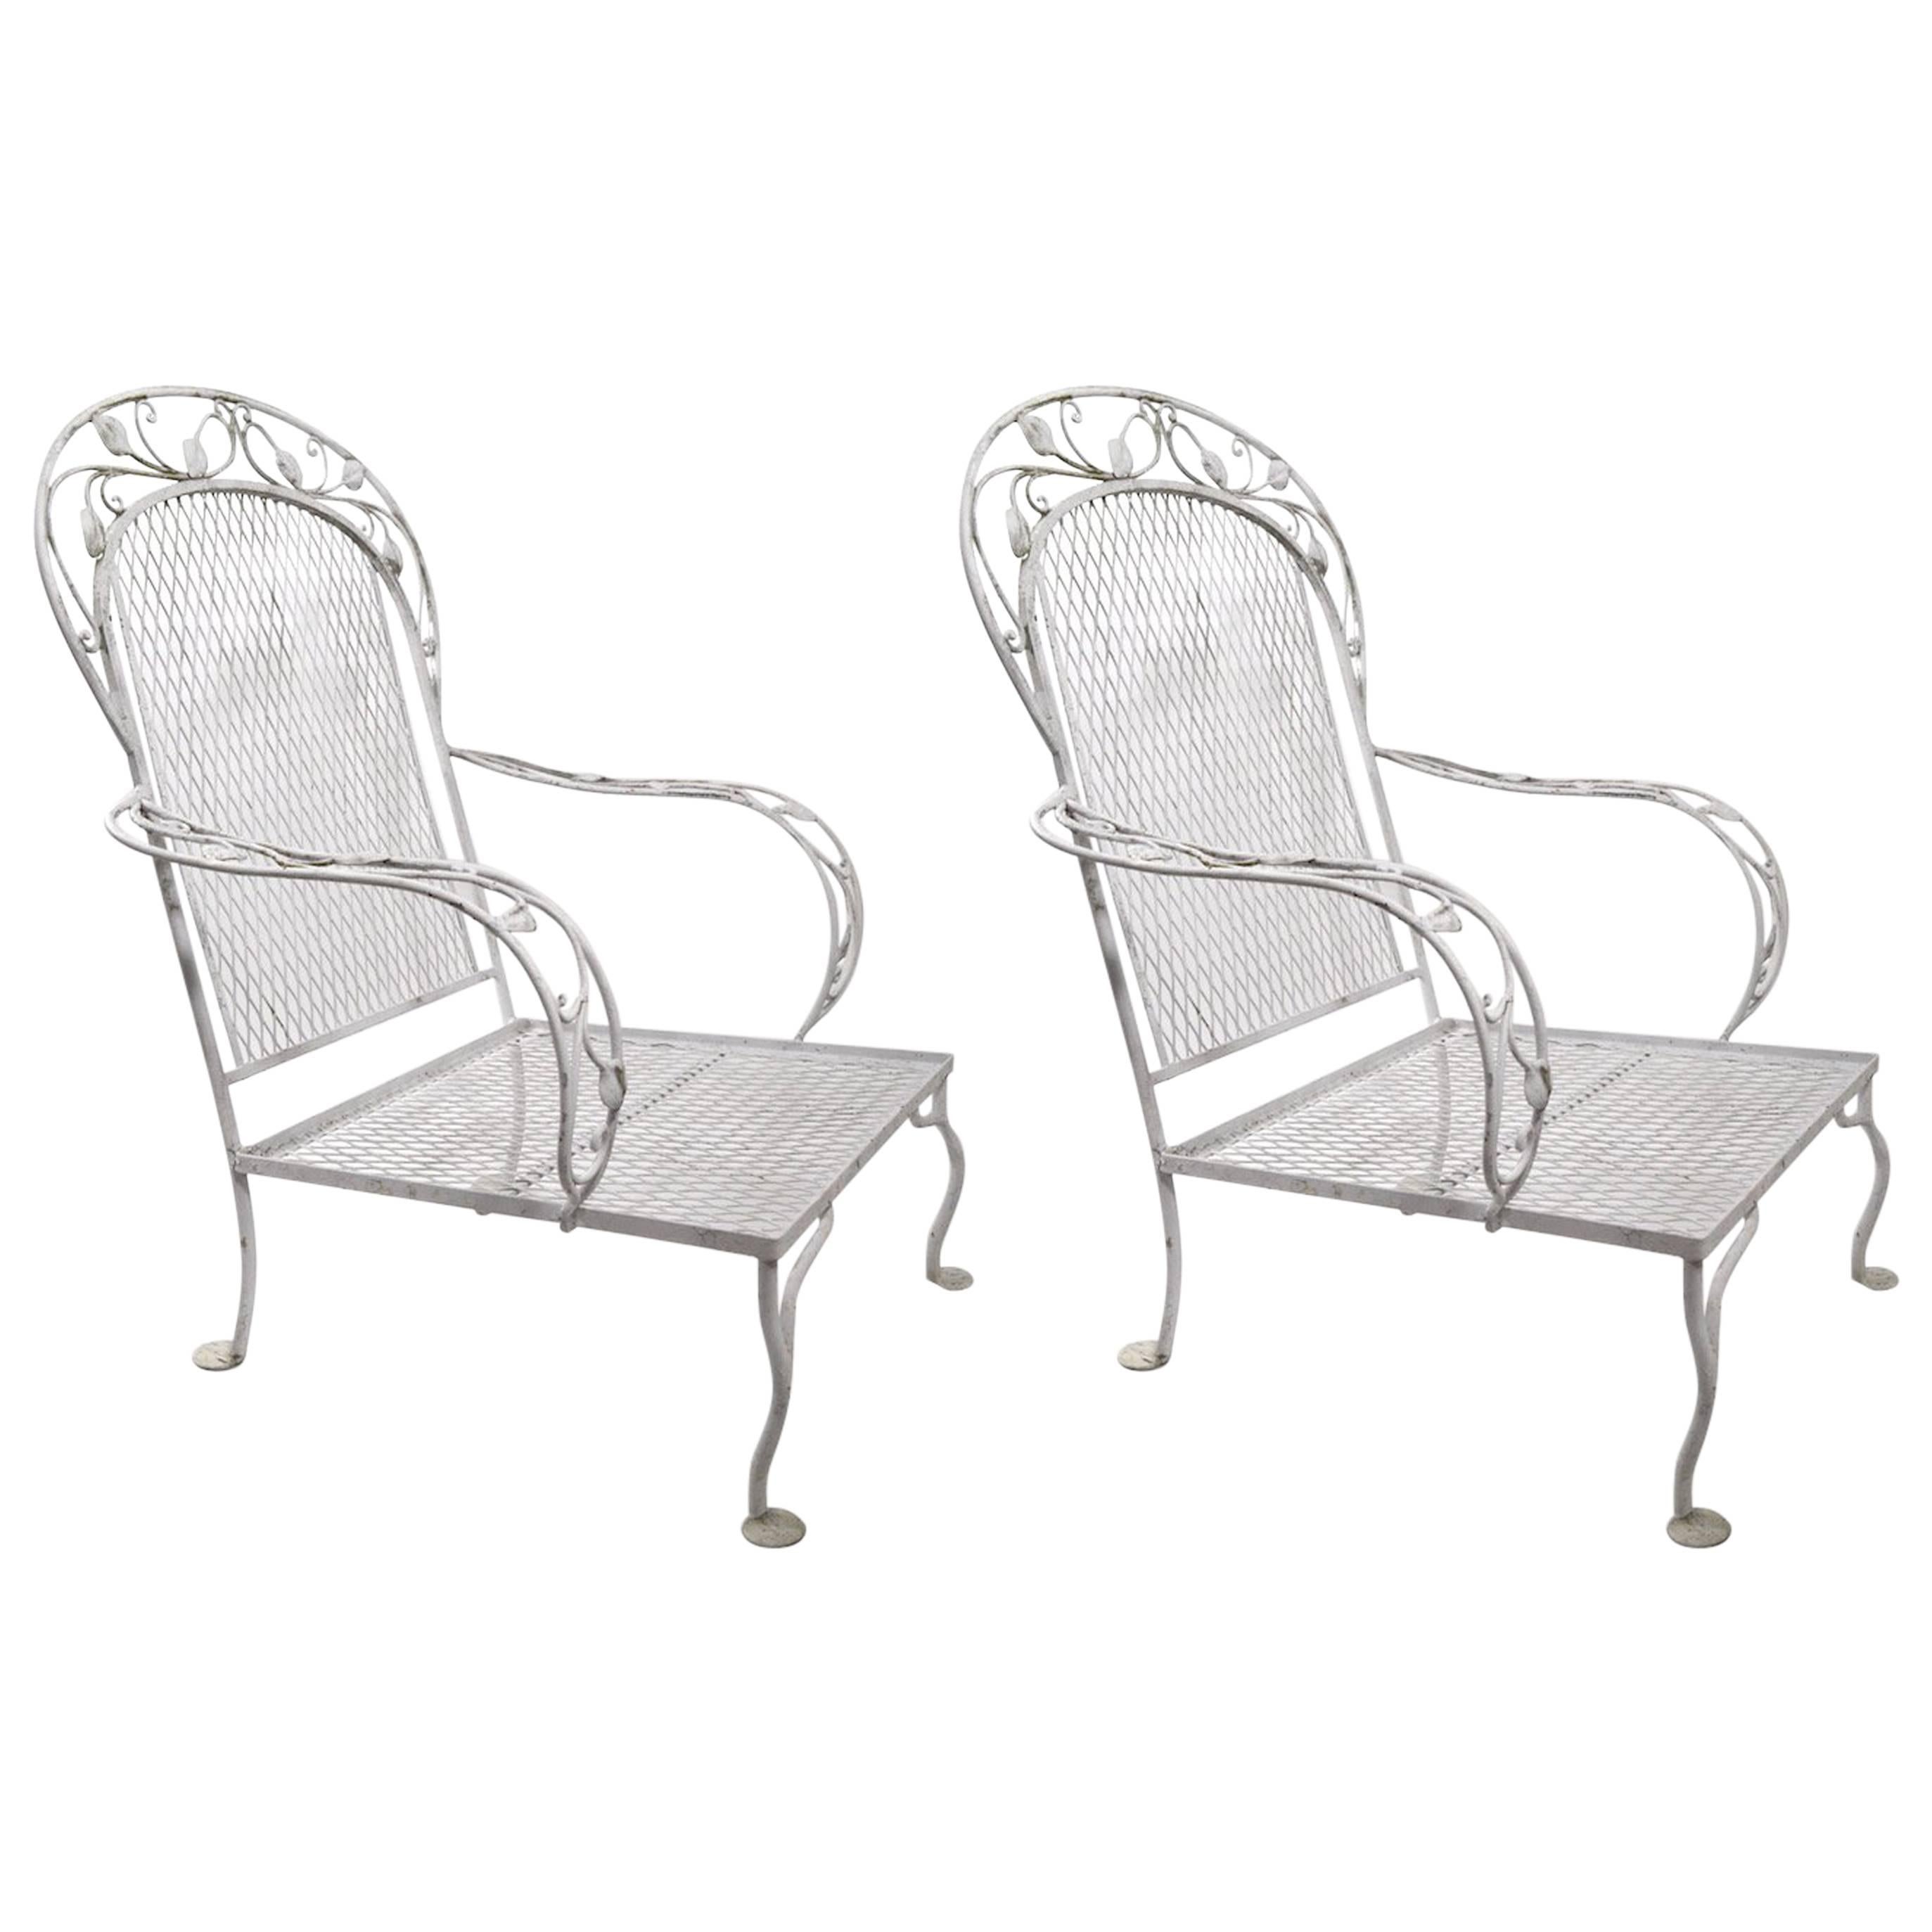 Pair of Iron Garden Patio Lounge Chairs Attributed to Woodard